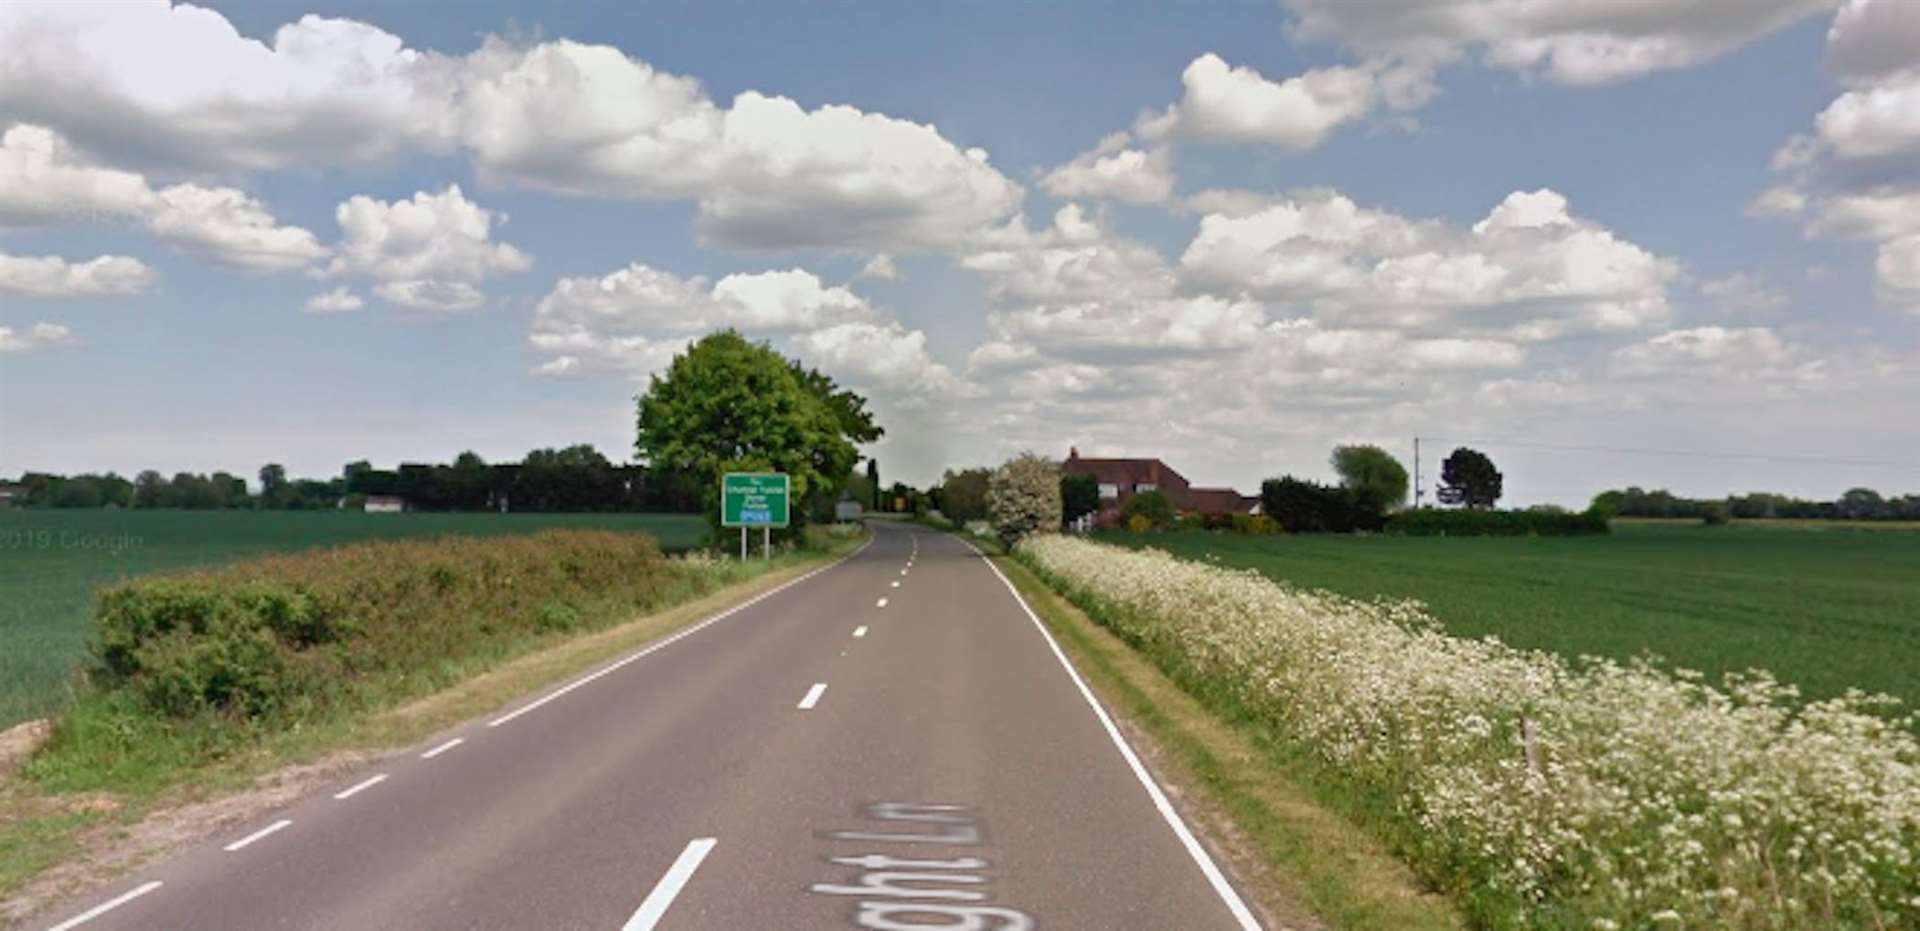 Traffic is building up on the A259 after the crash. Photo: Google Street View